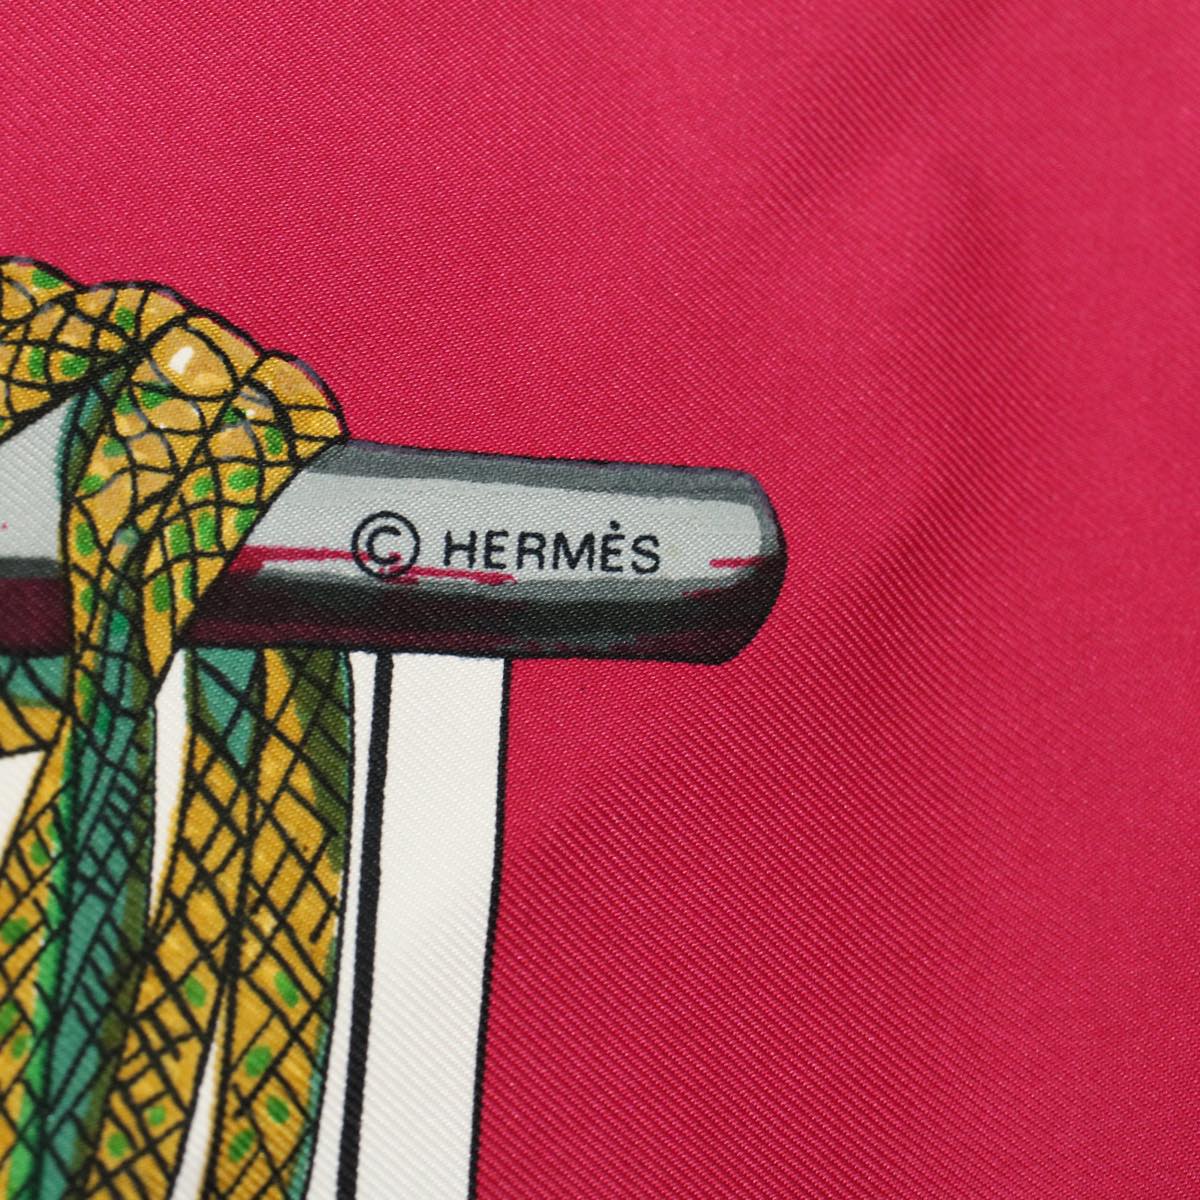 HERMES Carre 90 PASEMENTERIE Scarf Silk Wine Red Auth 57818